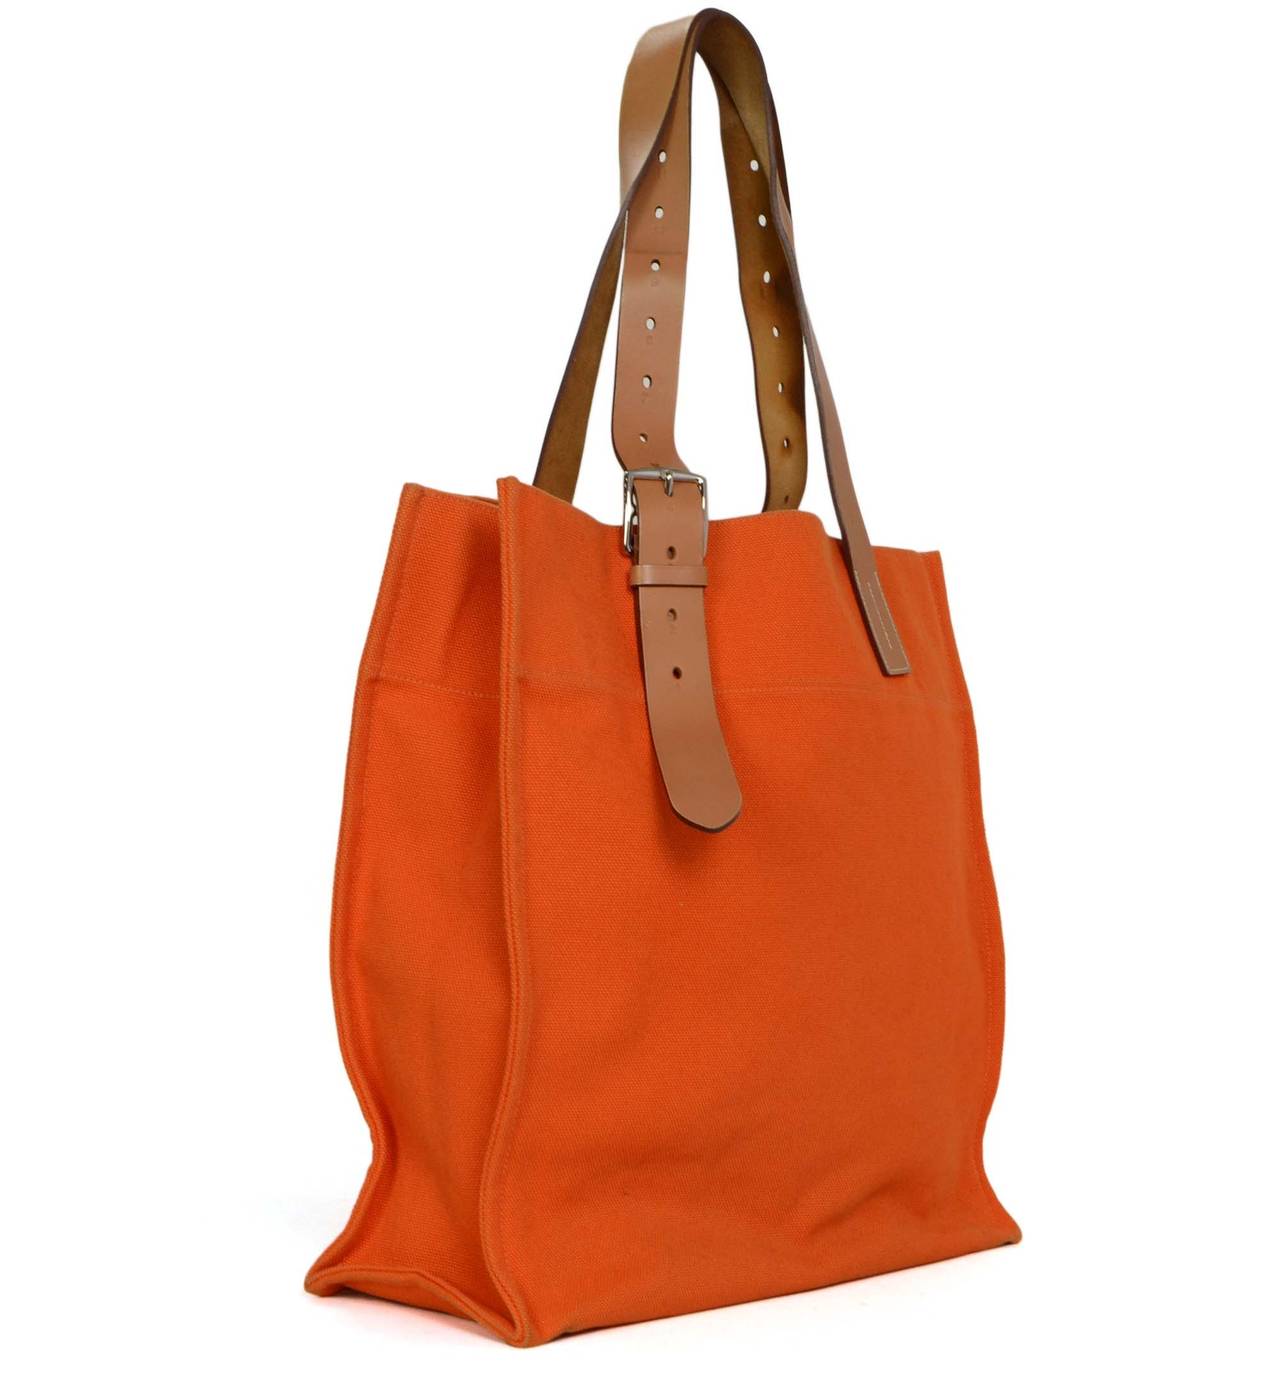 Hermes Orange Canvas Etriviere Tote Bag
Features adjustable leather shoulder straps
Made in: France
Year of Production: 2011
Color: Orange, tan and silvertone
Hardware: Palladium
Materials: Canvas, leather and metal
Lining: Orange